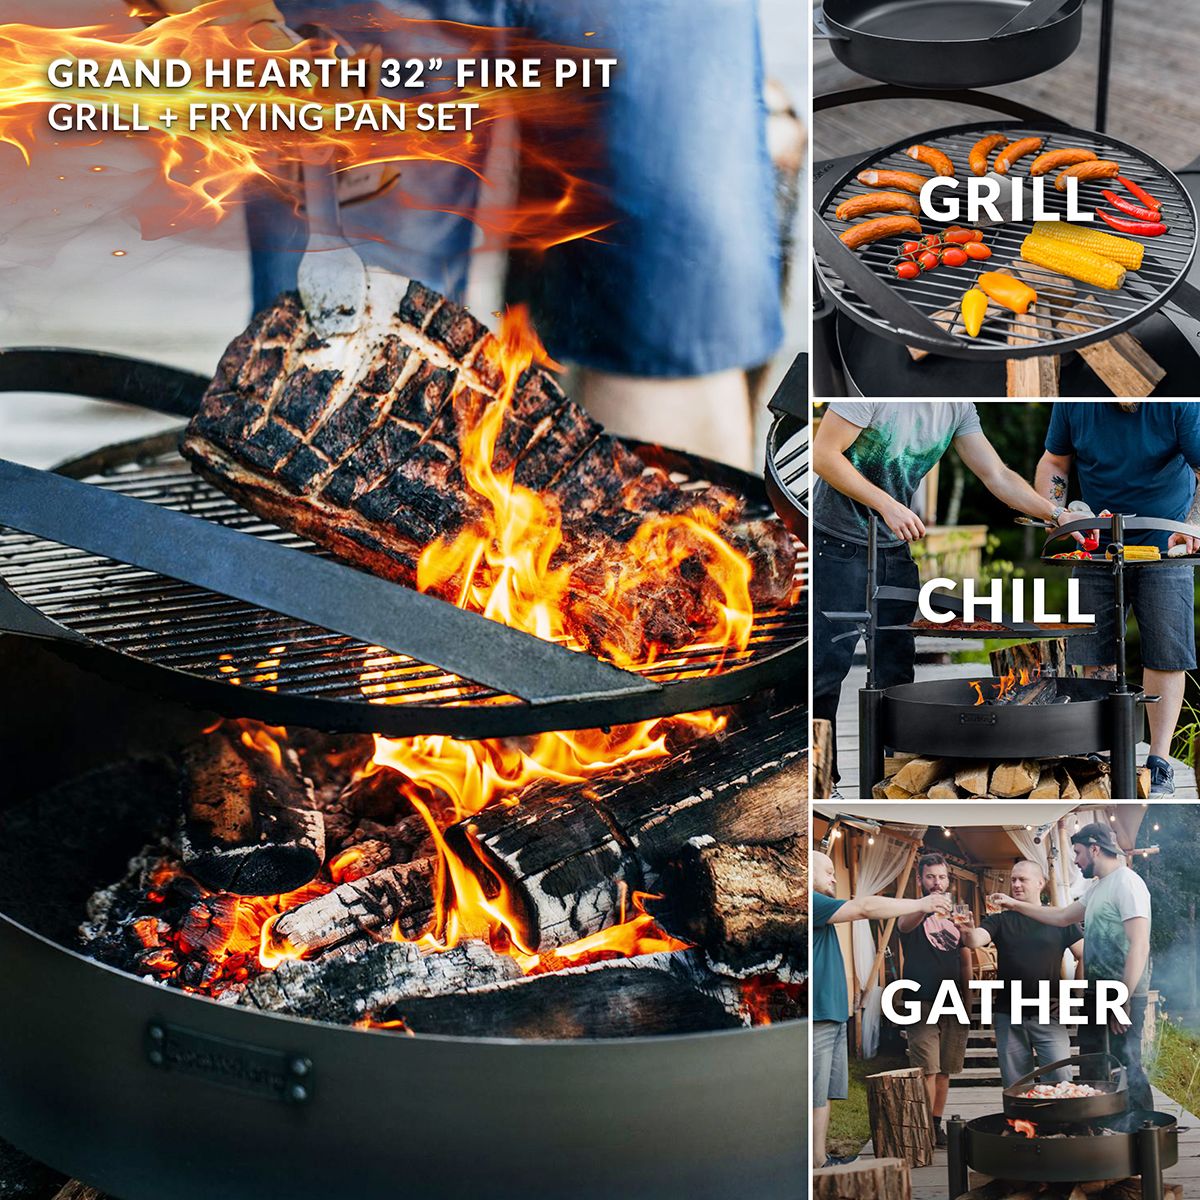 Grand Hearth 32" Grill and Frying Pan Set - Good Directions